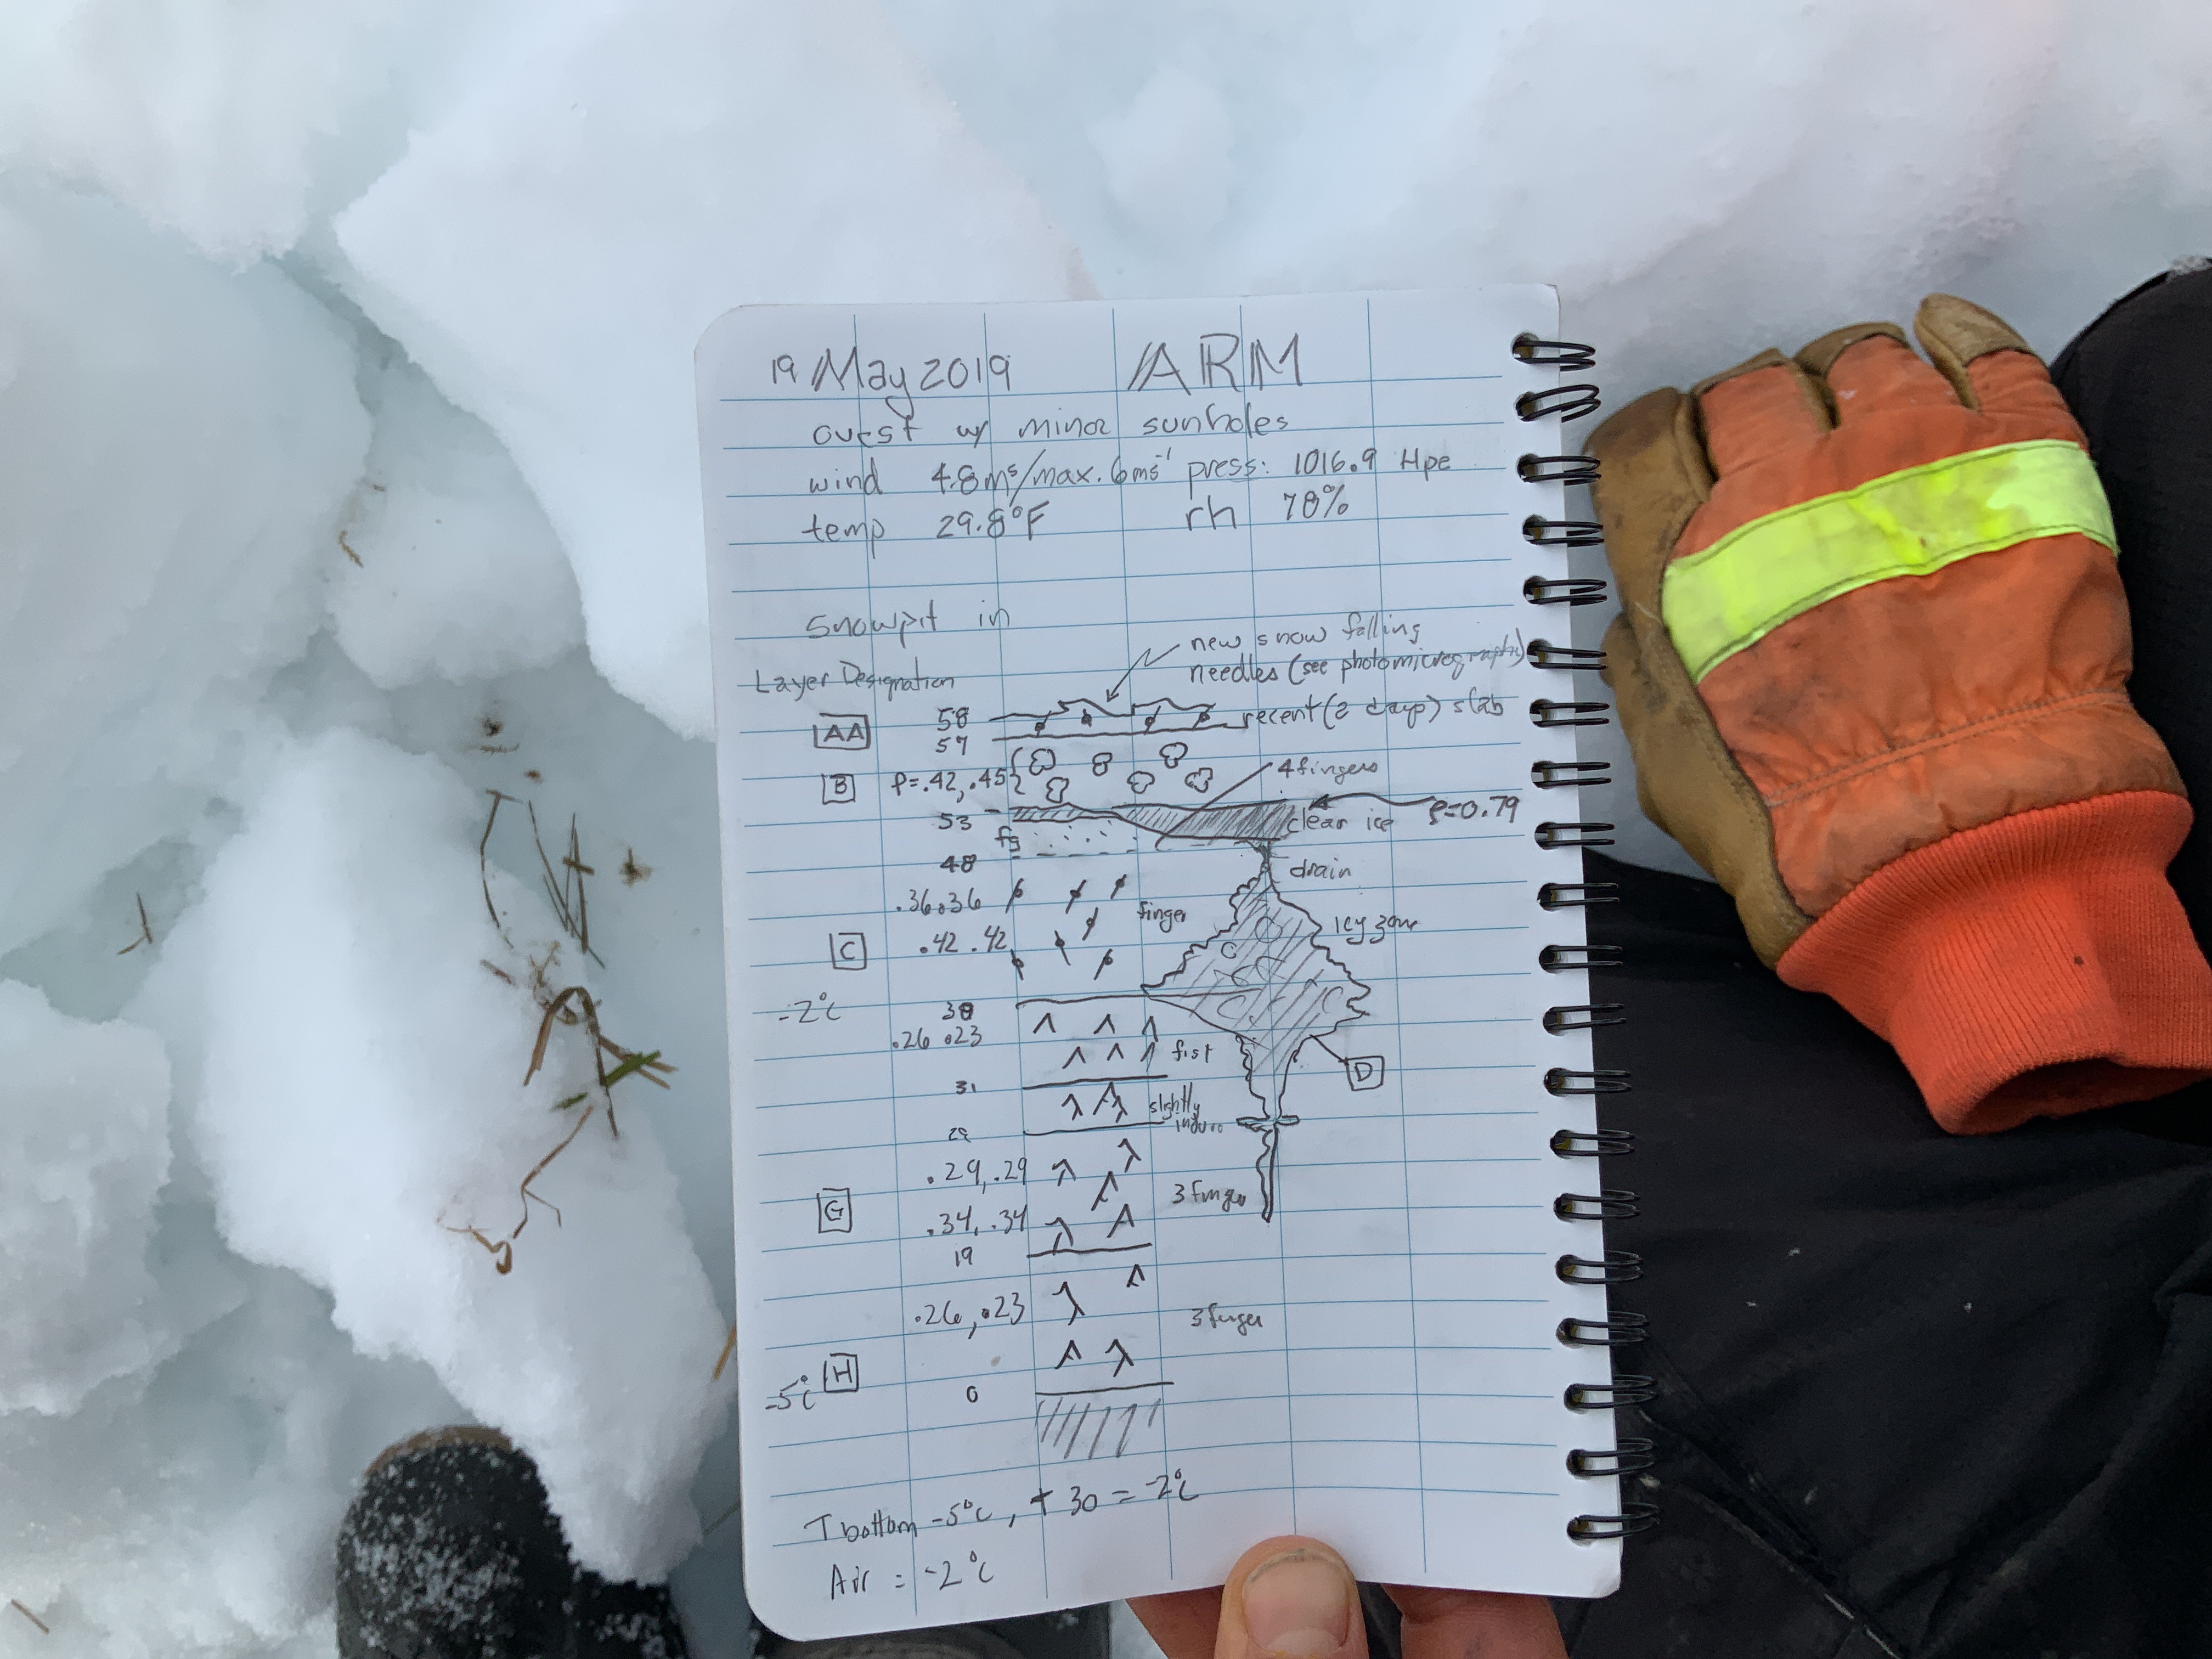 Snow pit diagram from North Slope of Alaska